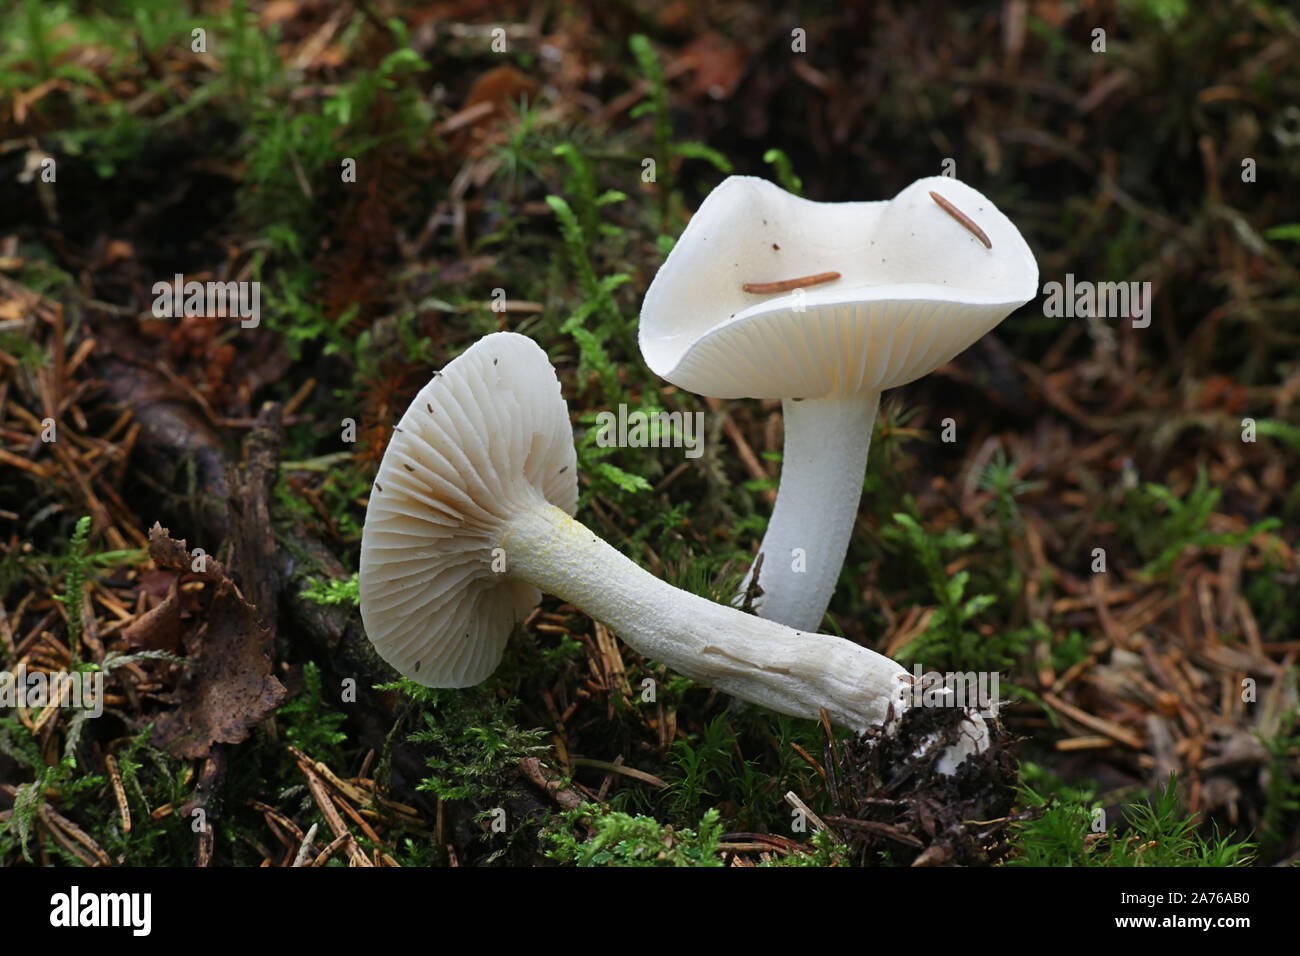 Hygrophorus agathosmus, known as the gray almond waxy cap or the almond woodwax, wild mushroom from Finland Stock Photo